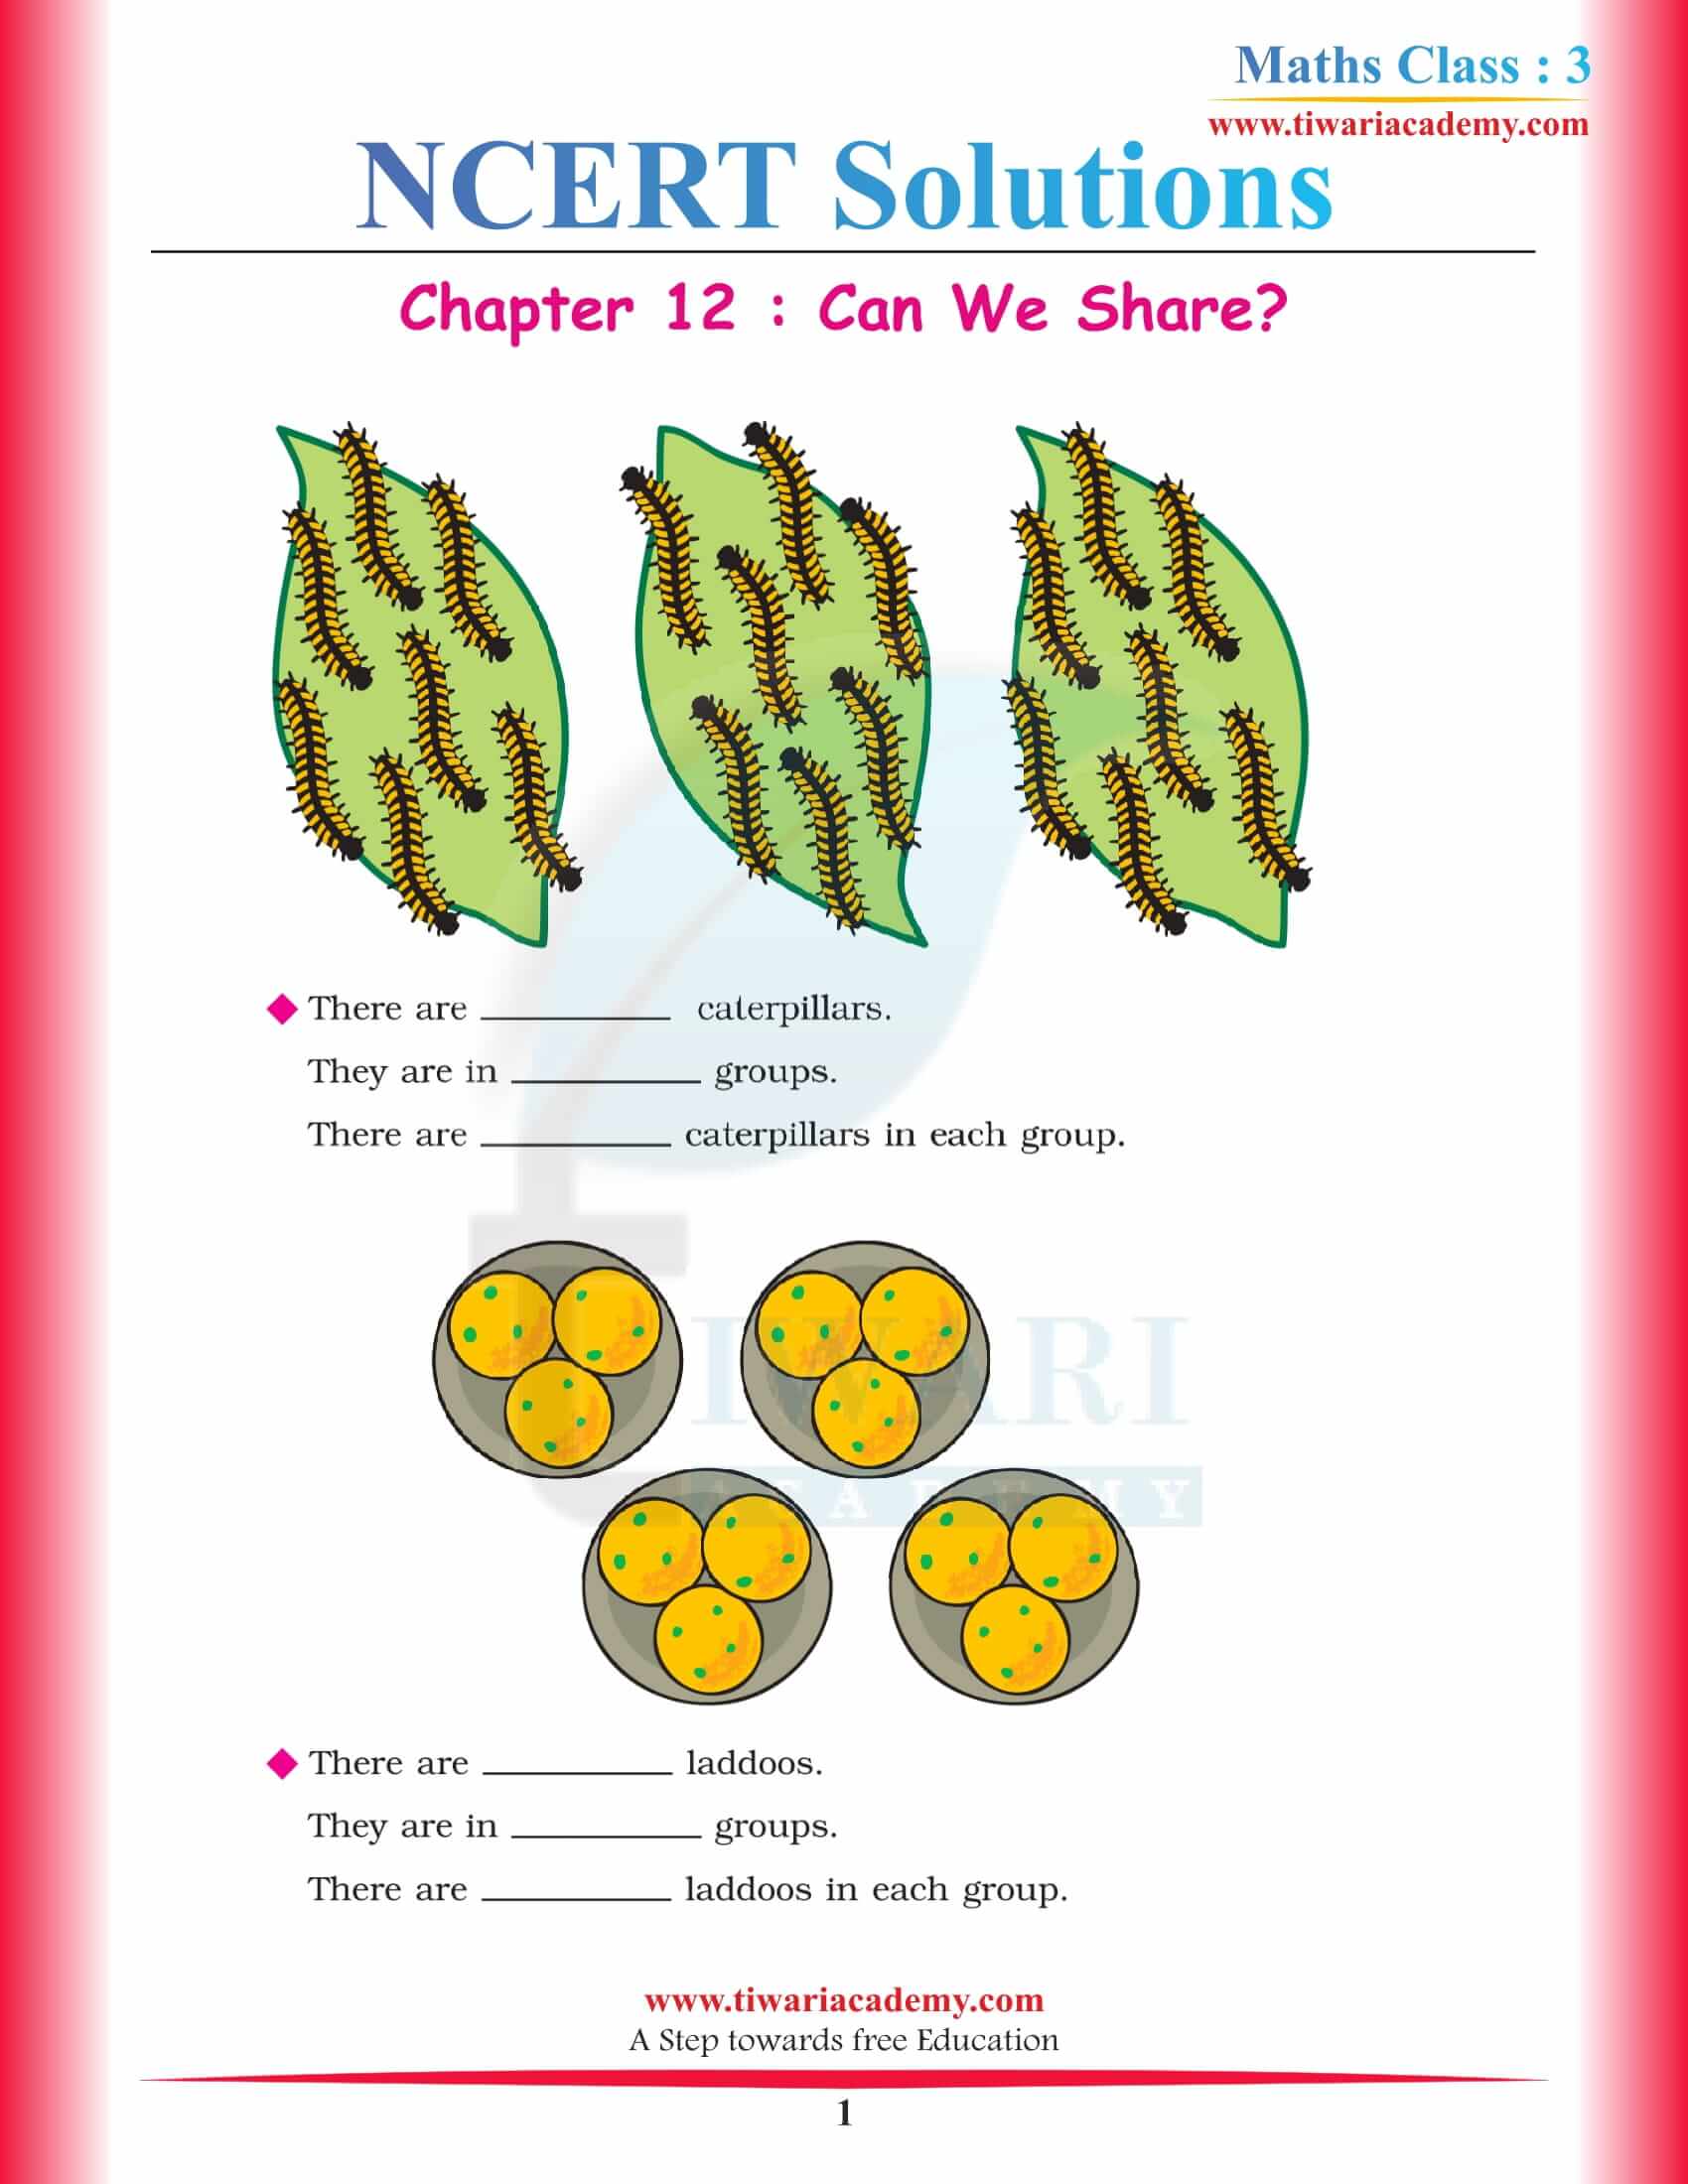 NCERT Solutions for Class 3 Maths Chapter 12 Can we Share?